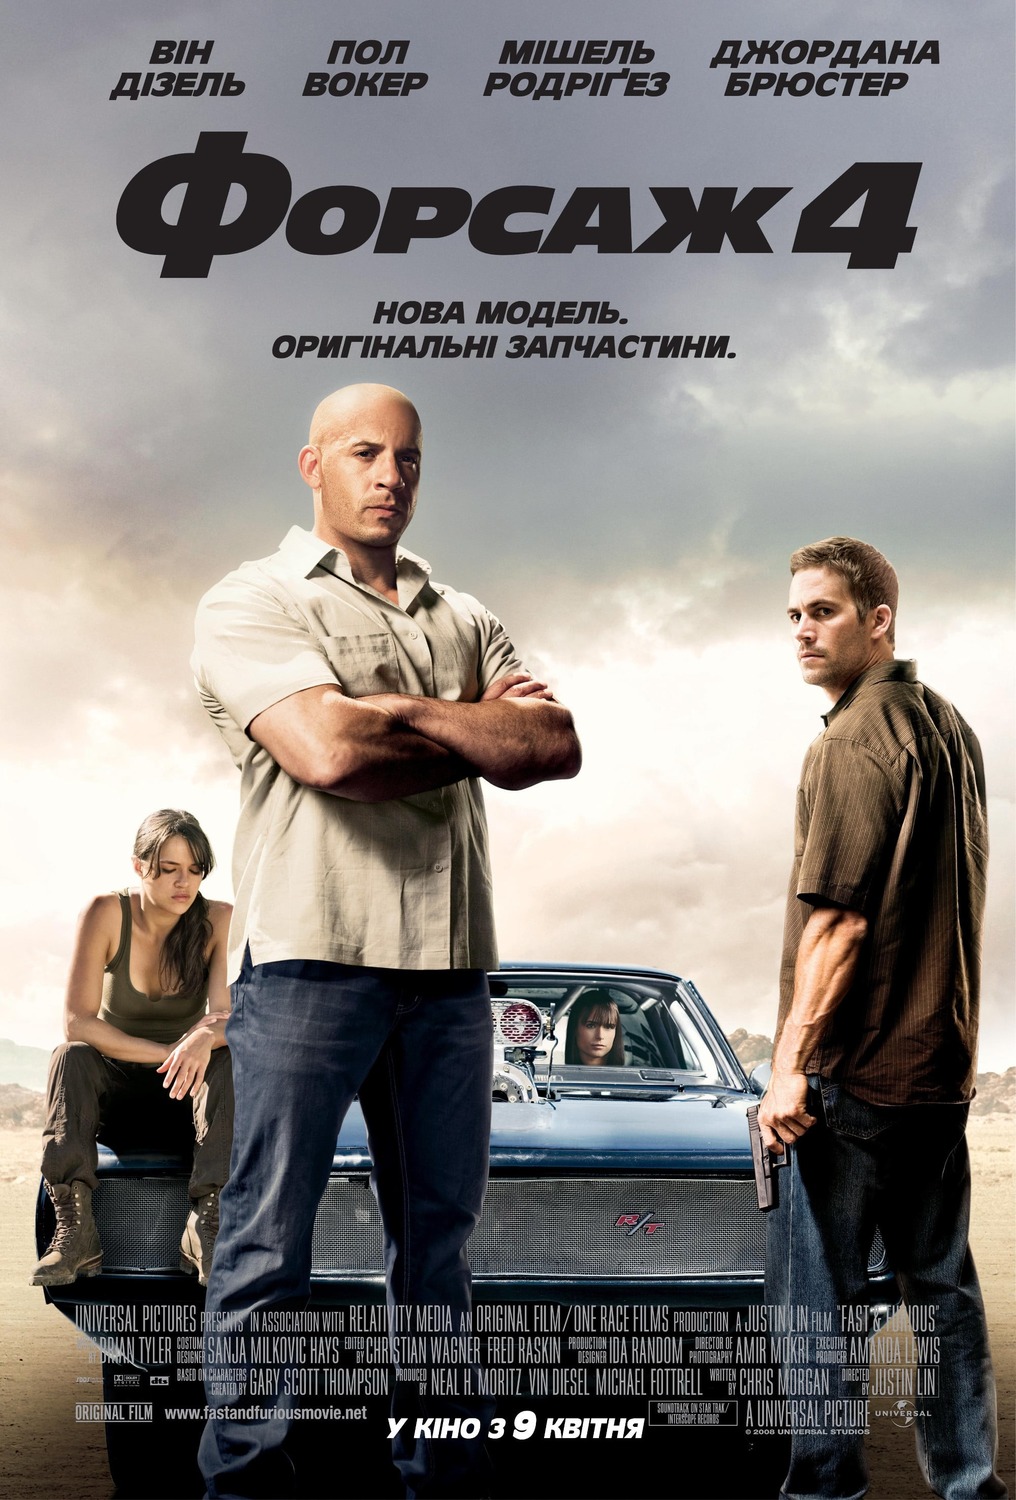 Extra Large Movie Poster Image for Fast & Furious (#4 of 7)